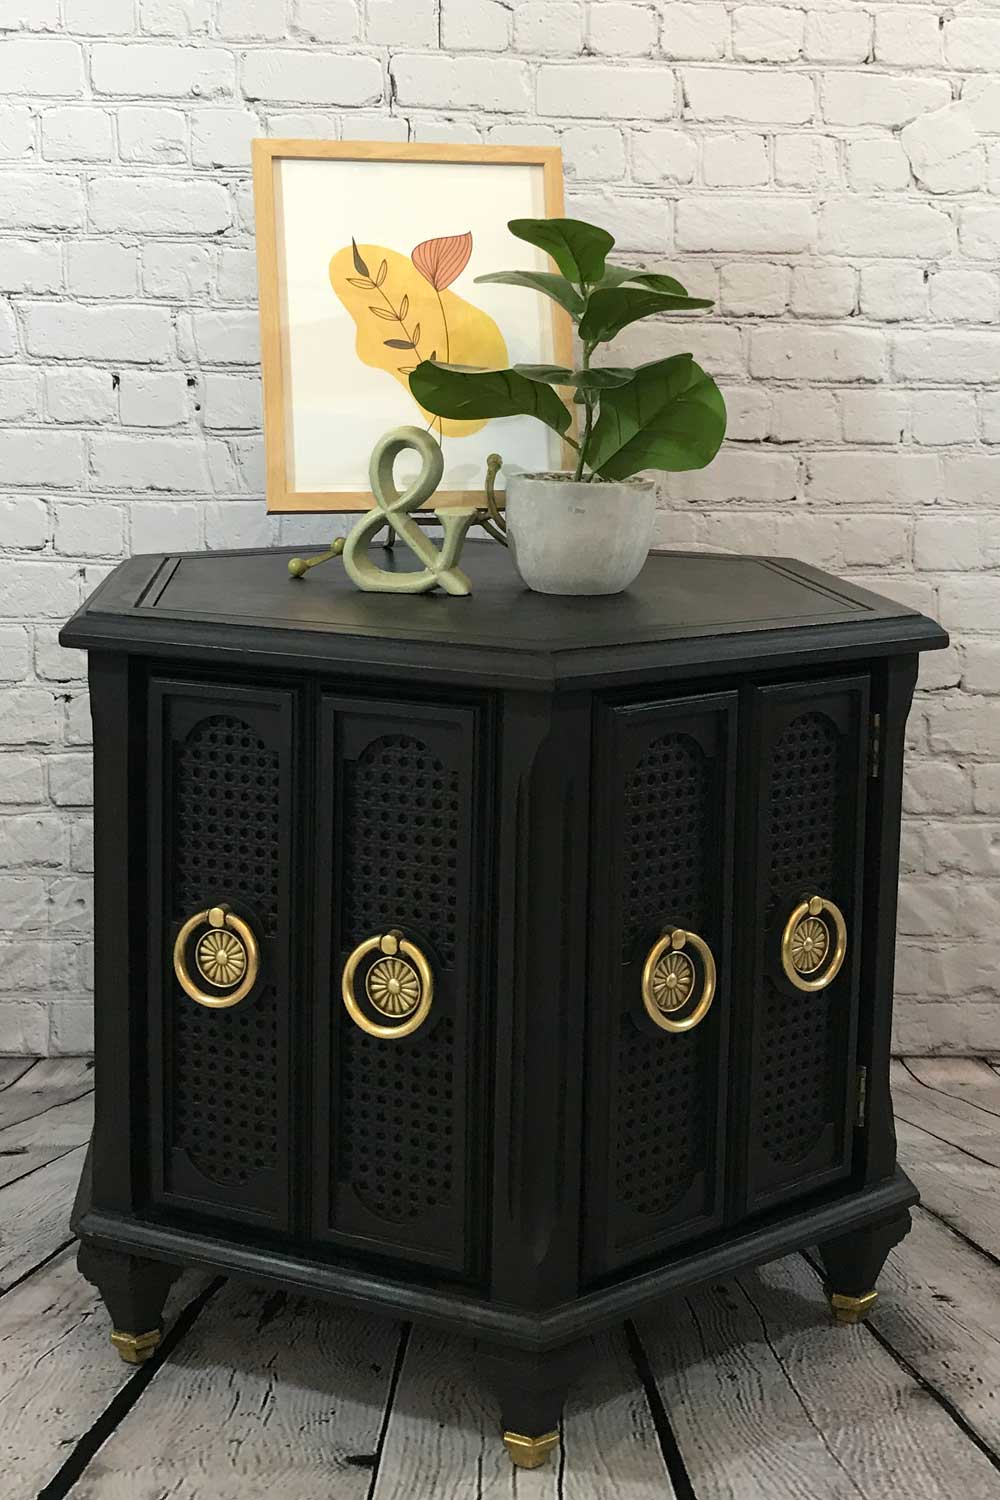 Finished black chalk painted vintage mid-century hexagonal end table with polished original hardware staged with plant and picture